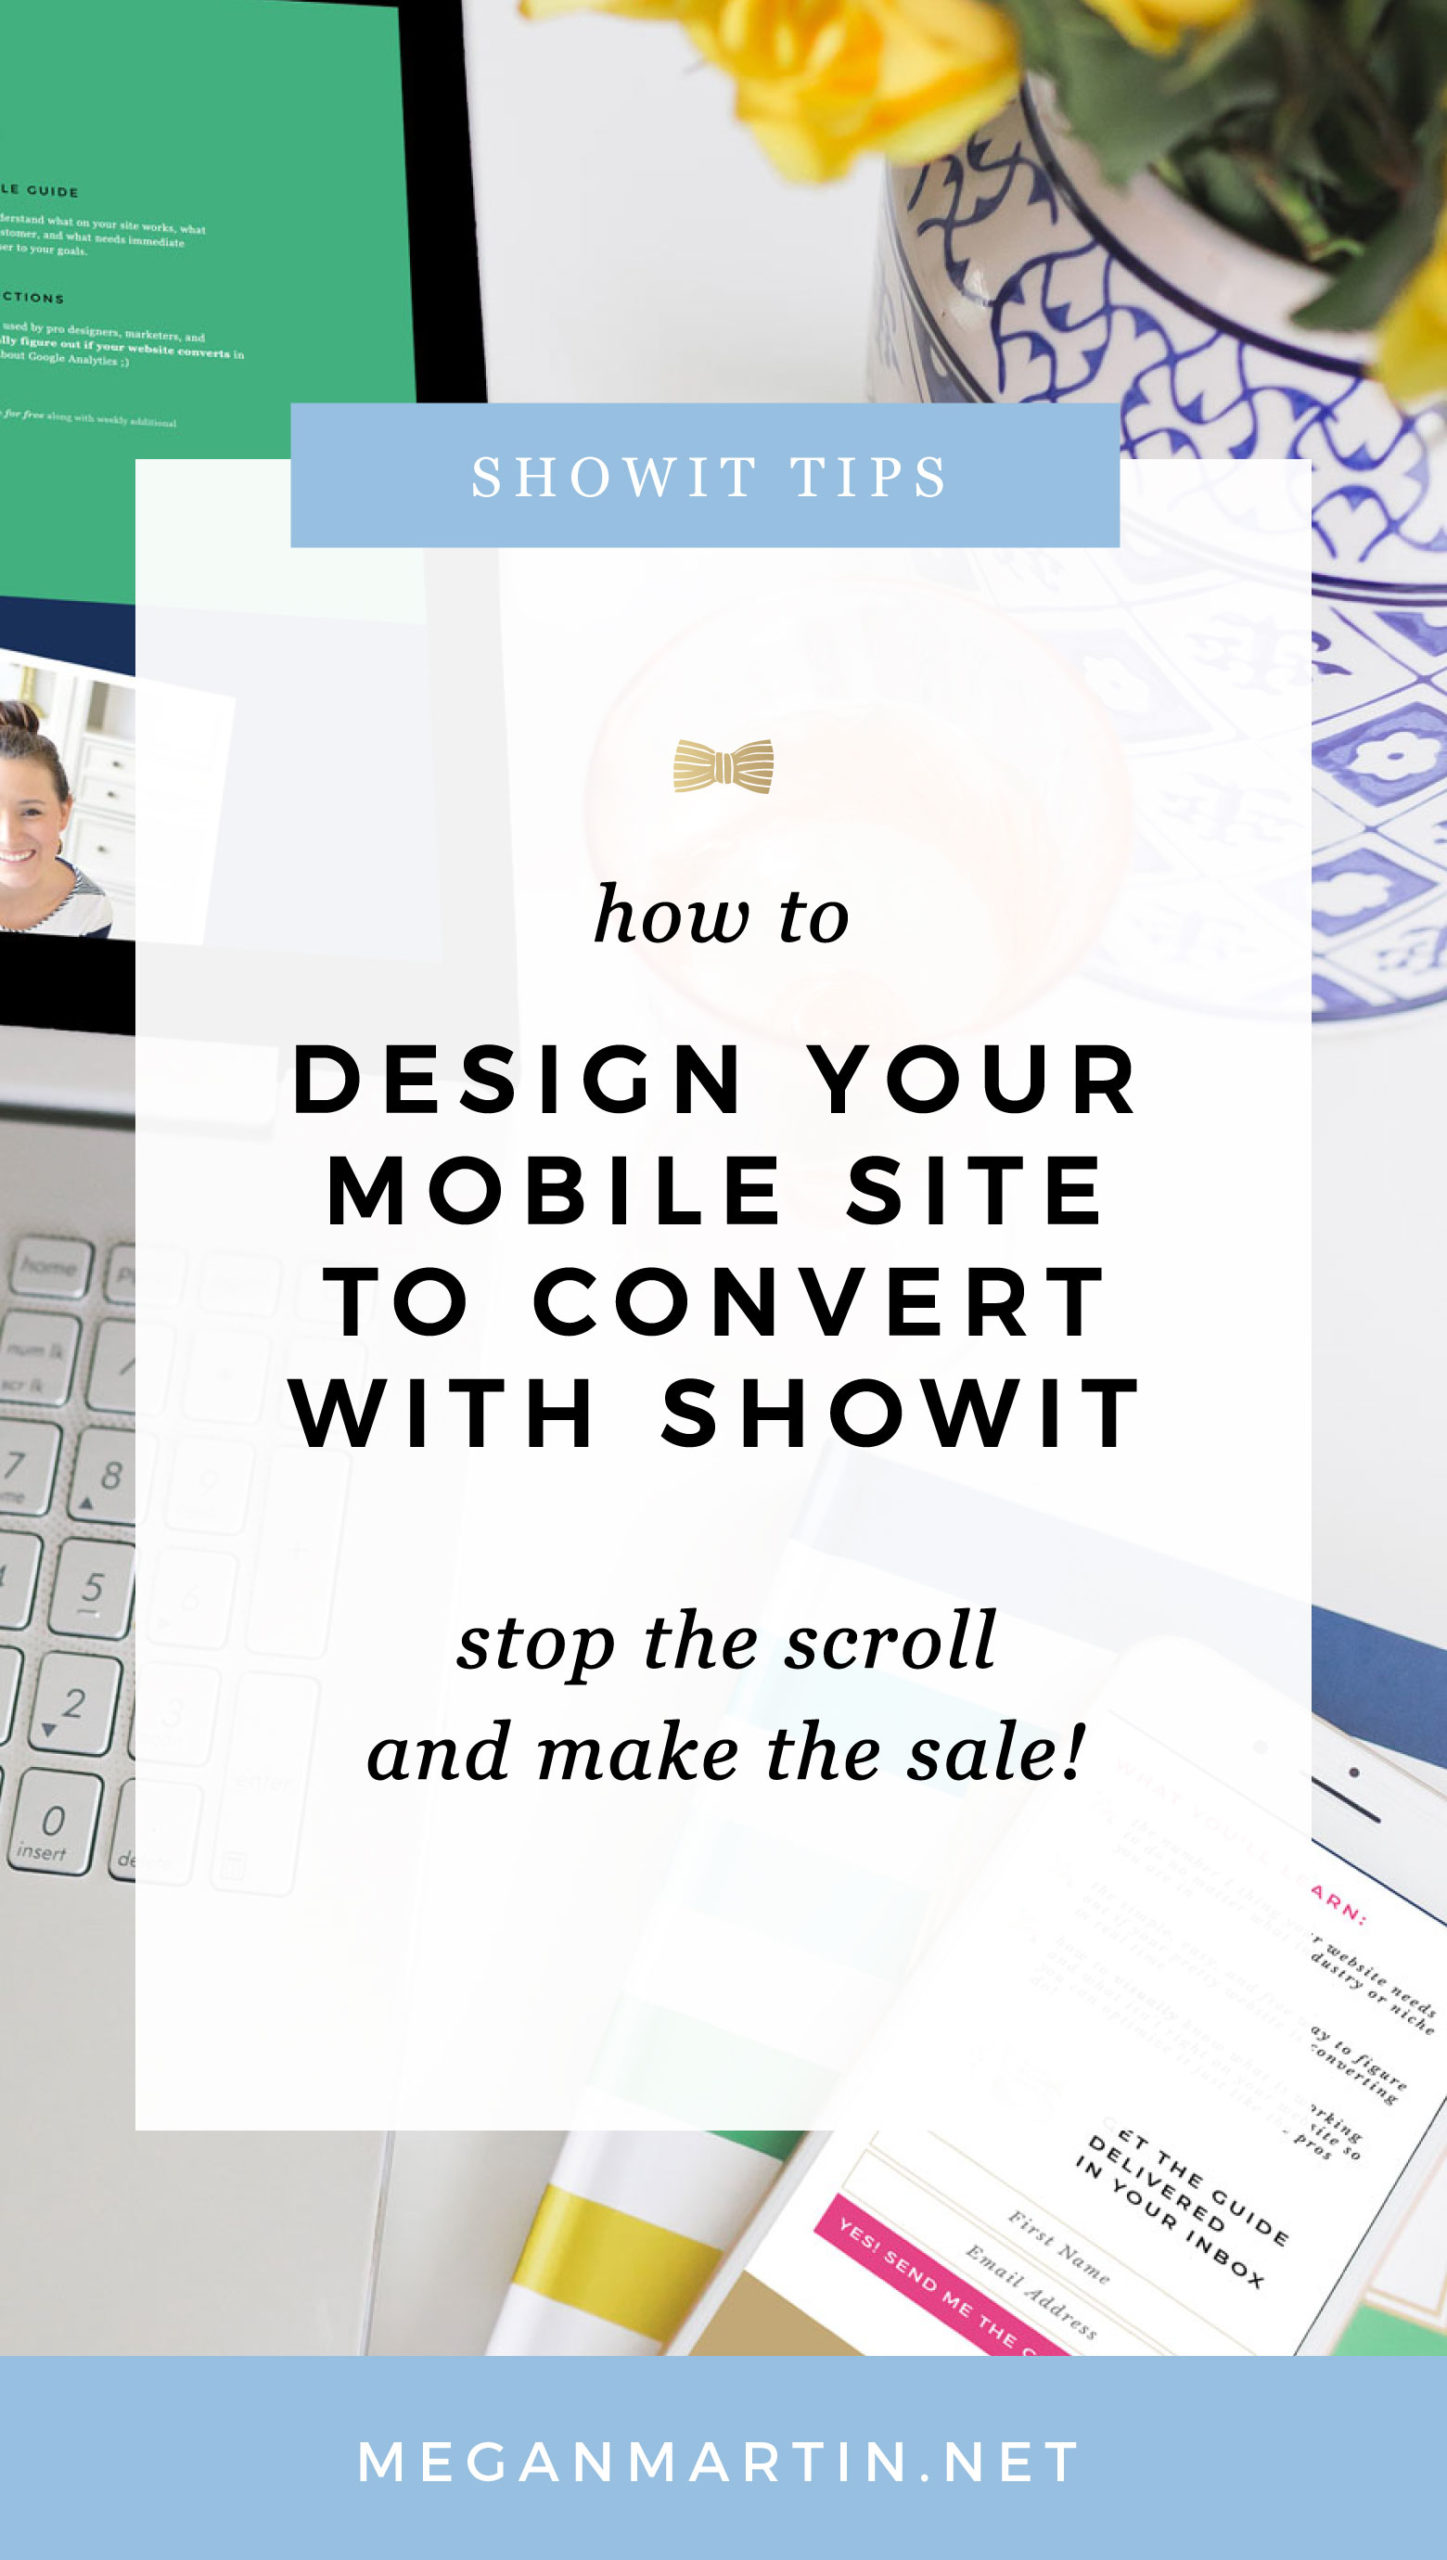 How to Design Your Mobile Site to Convert with Showit. Mobile optimized website design. Drag and drop website builder